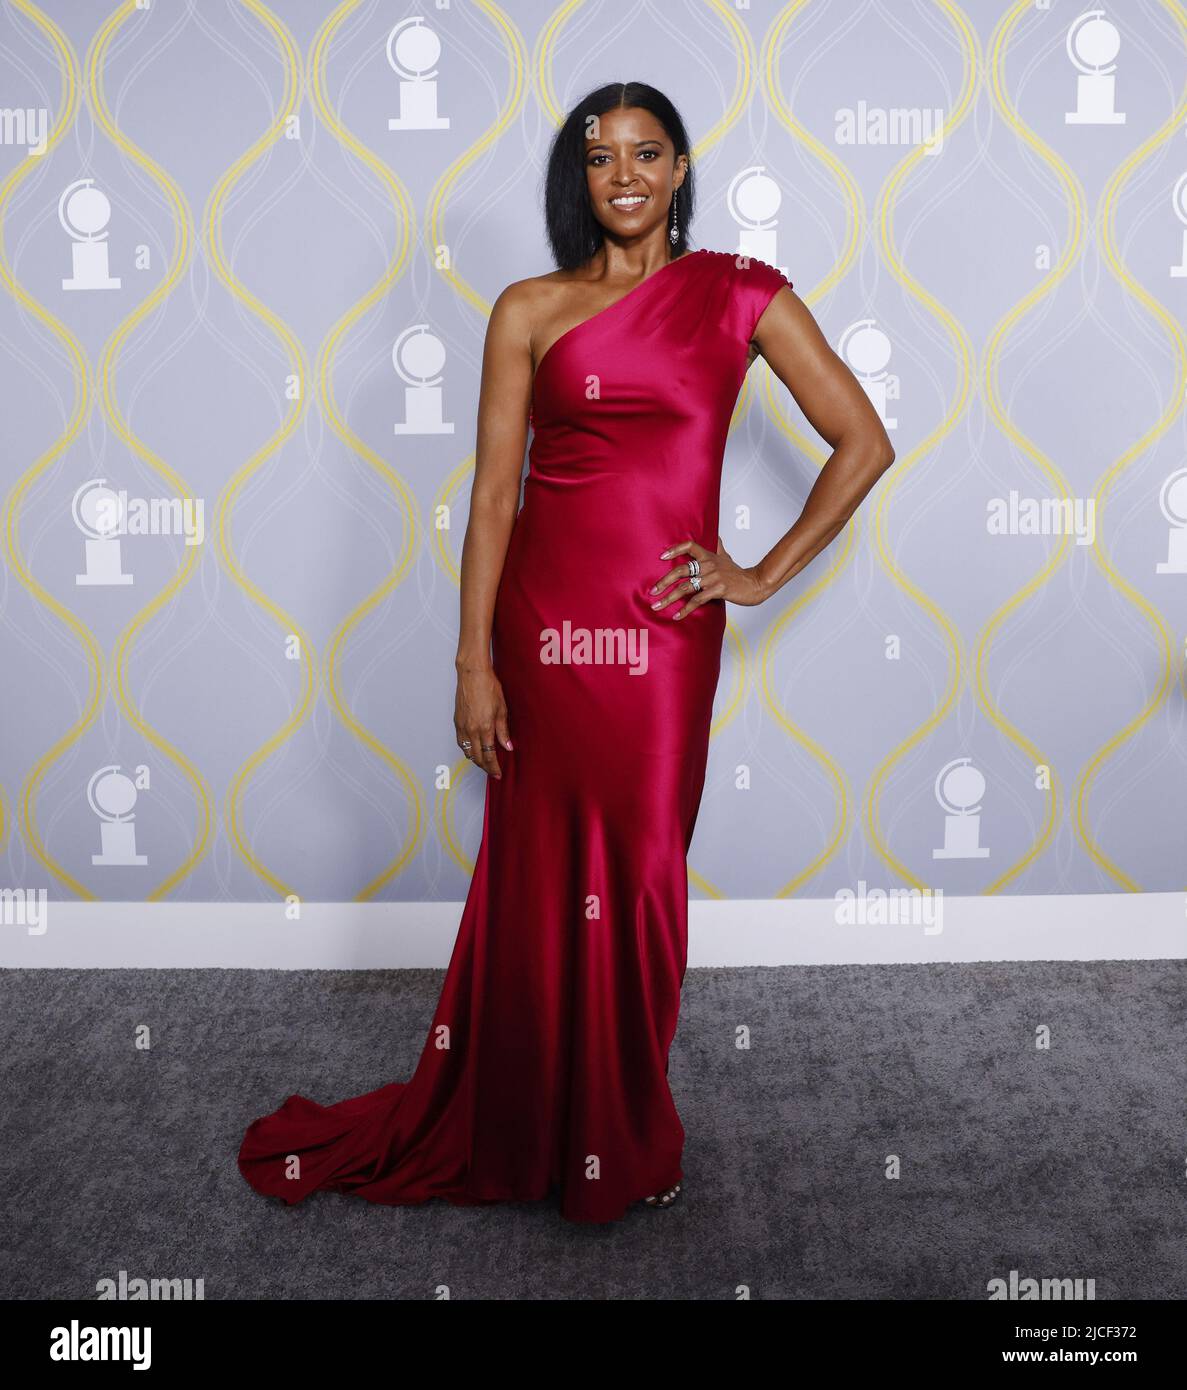 New York, United States. 13th June, 2022. Renee Elise Goldsberry arrives on the red carpet at The 75th Annual Tony Awards at Radio City Music Hall on June 12, 2022 in New York City. Photo by John Angelillo/UPI Credit: UPI/Alamy Live News Stock Photo